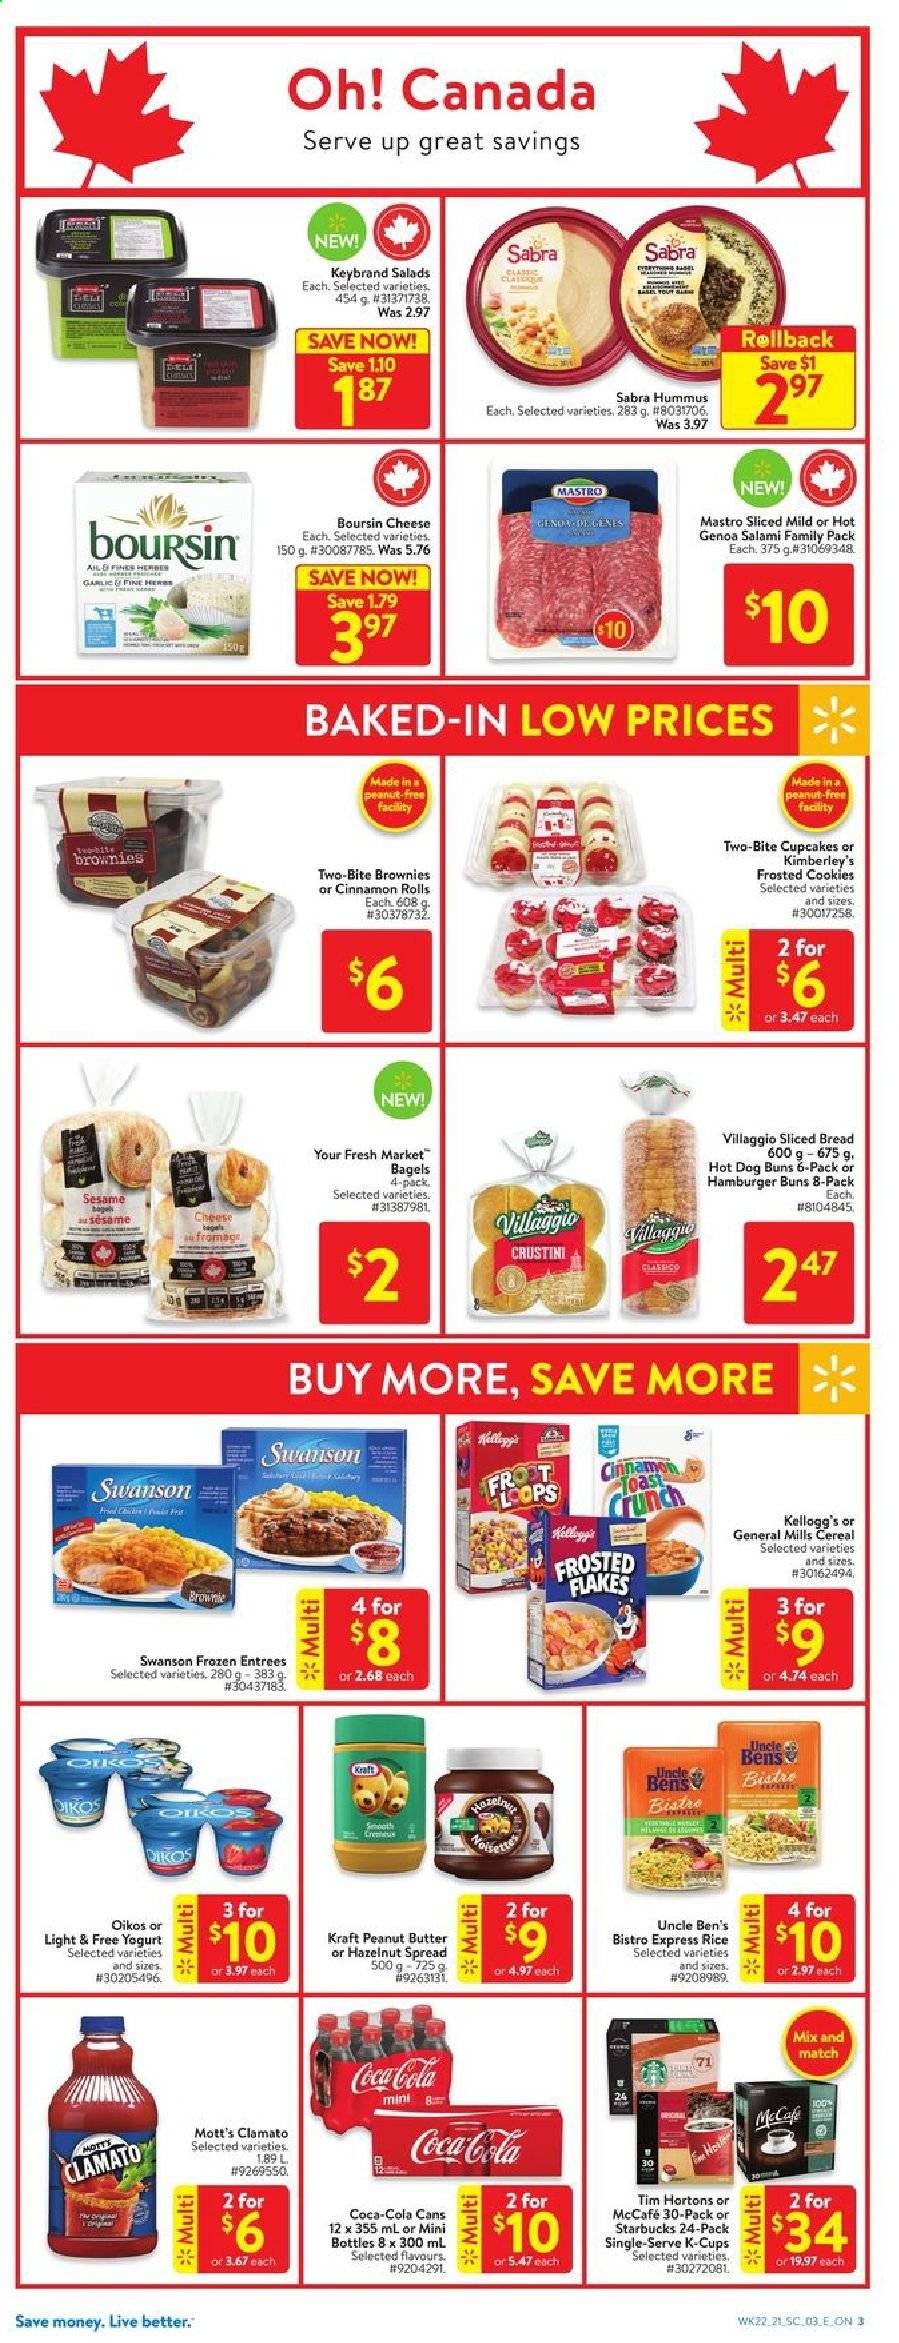 thumbnail - Walmart Flyer - June 24, 2021 - June 30, 2021 - Sales products - bagels, bread, buns, burger buns, cinnamon roll, cupcake, brownies, Mott's, Kraft®, salami, hummus, cheese, Oikos, cookies, Kellogg's, Uncle Ben's, cereals, Frosted Flakes, rice, peanut butter, hazelnut spread, Coca-Cola, Clamato, coffee capsules, Starbucks, McCafe, K-Cups. Page 3.